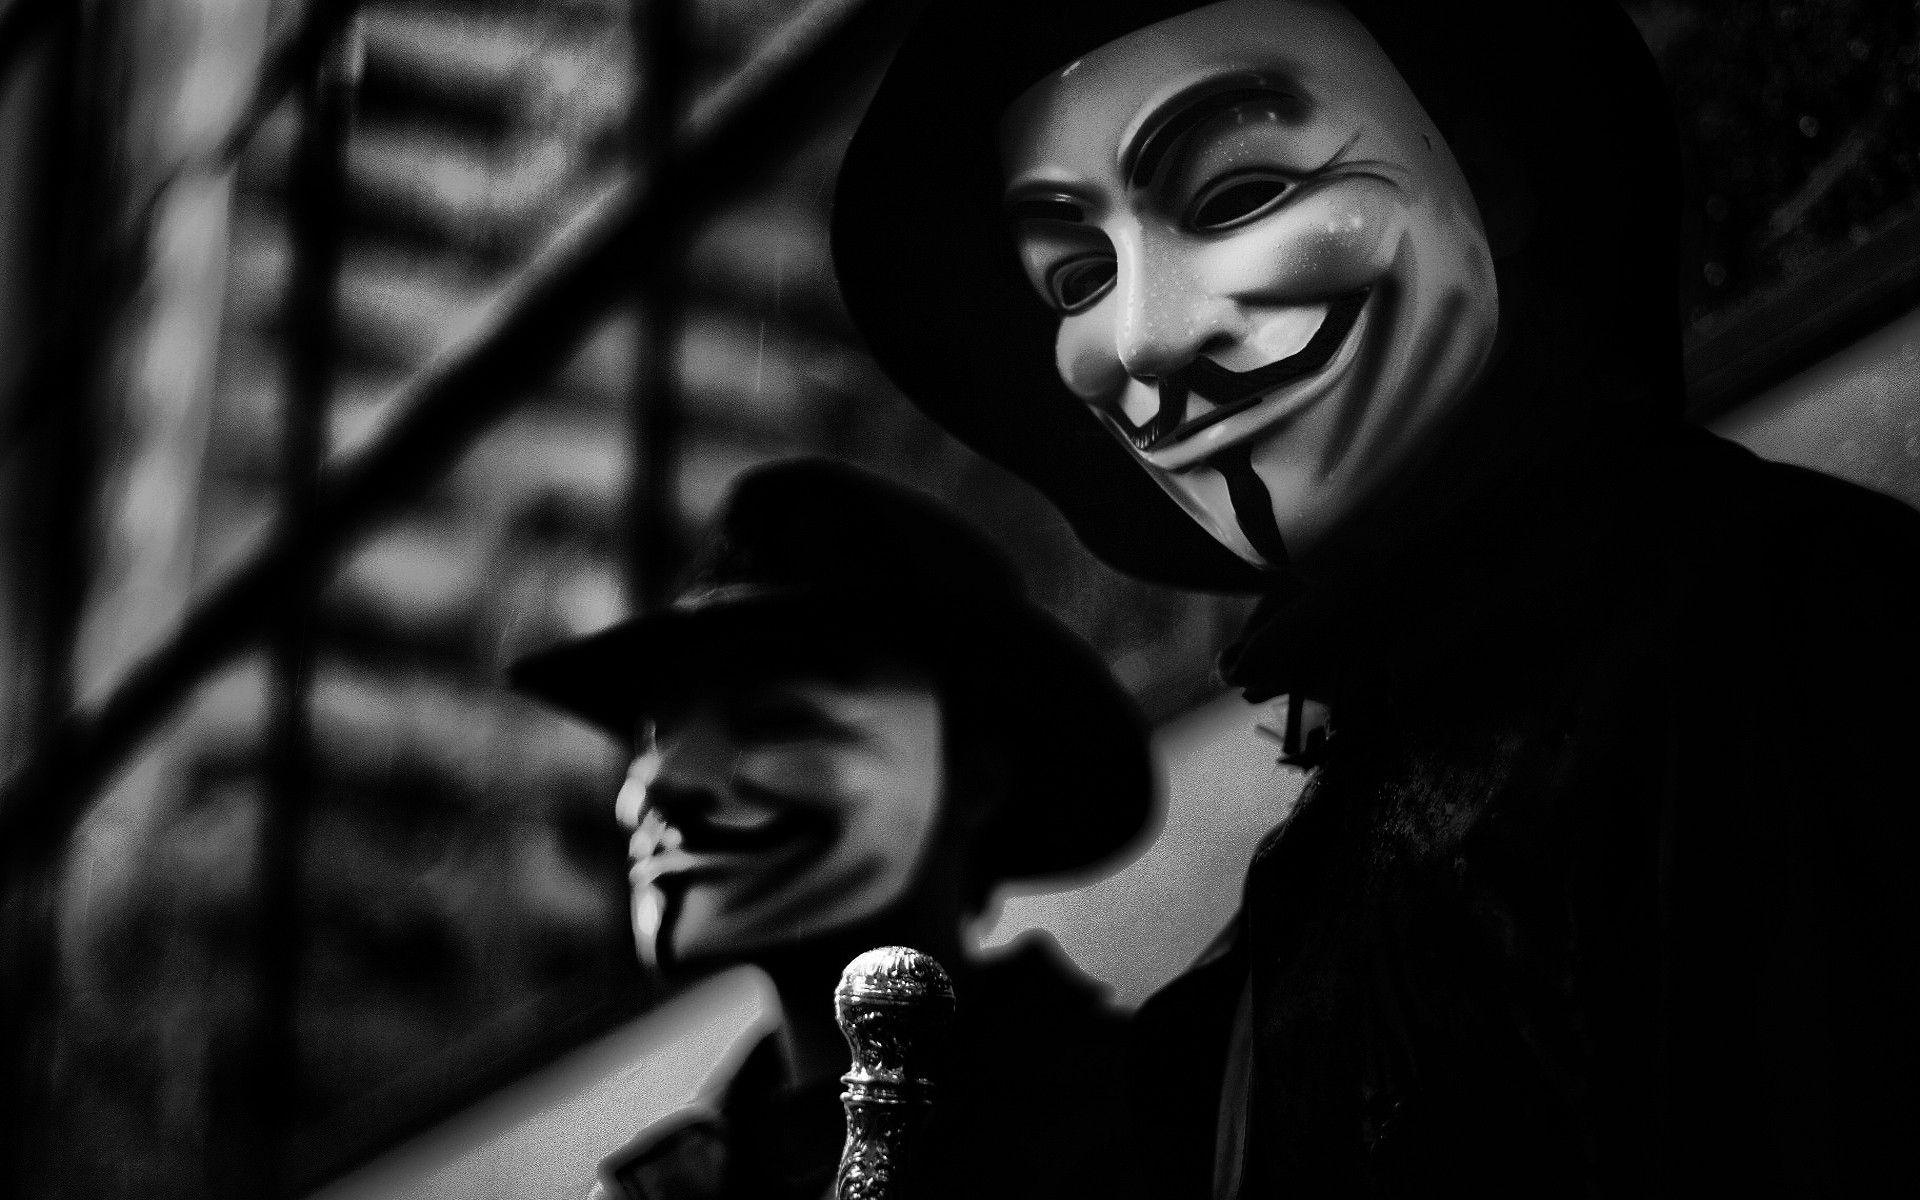 Wallpaper For > Anonymous Wallpaper